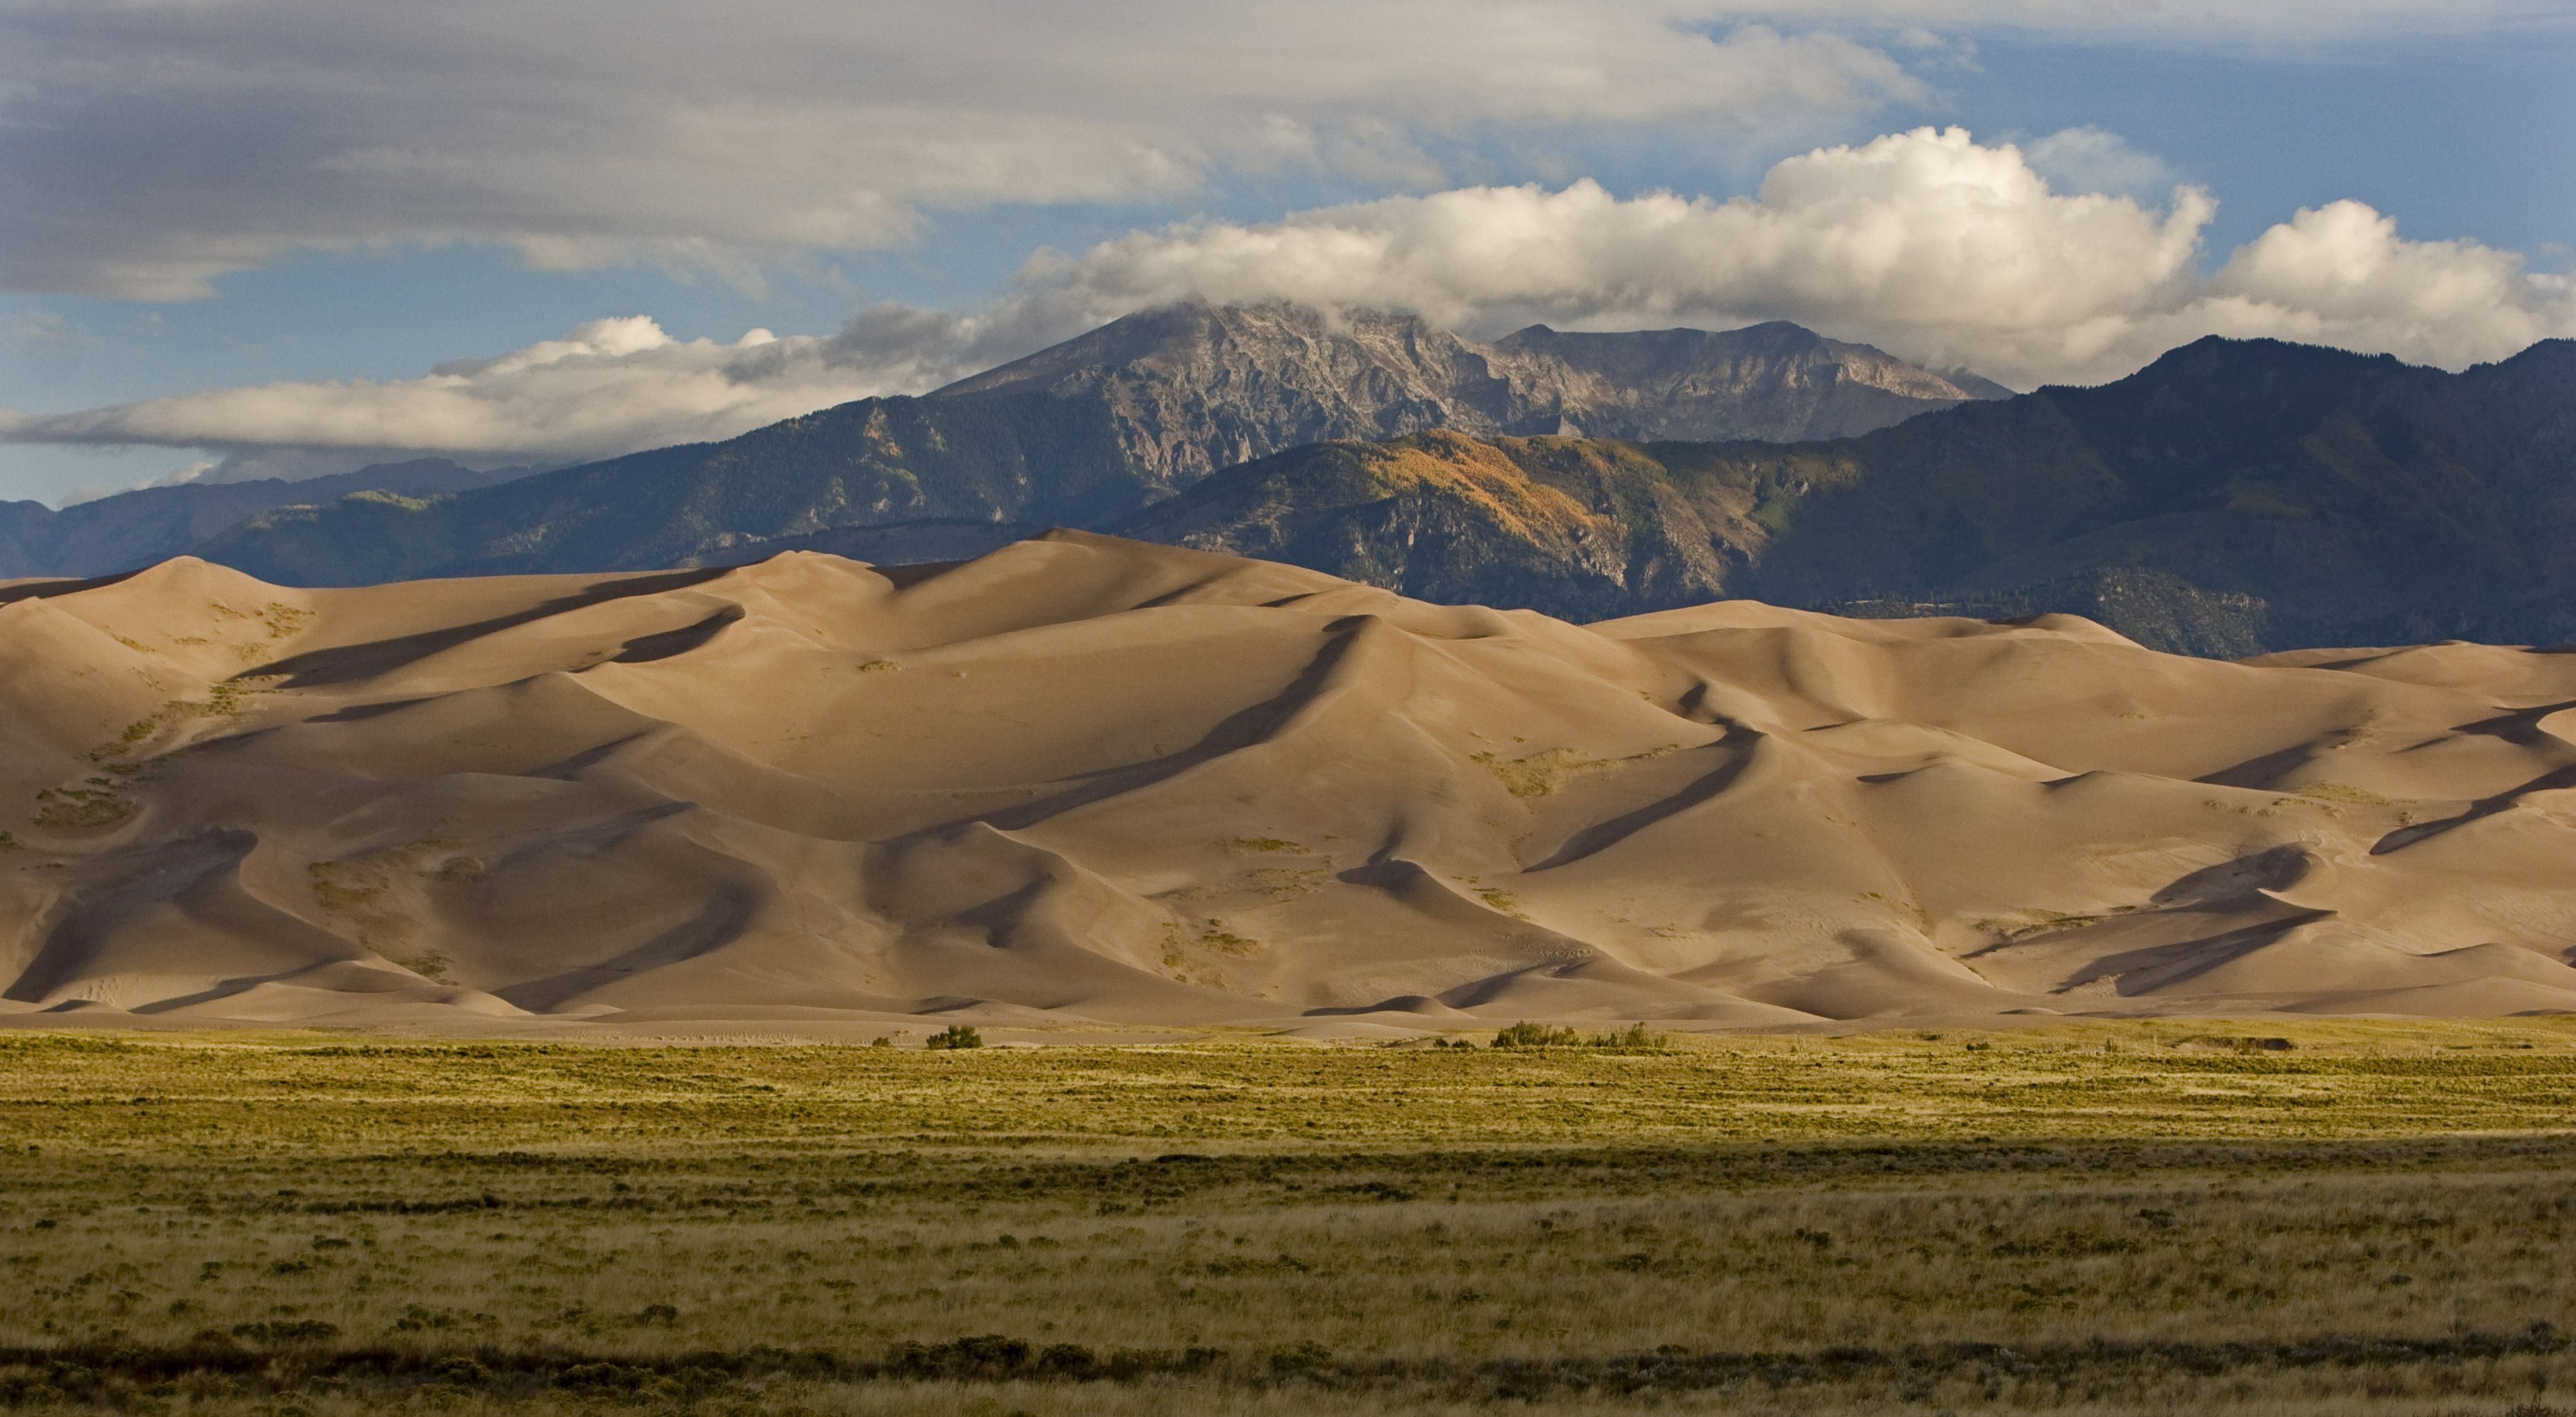 A landscape shot of sand dunes on green grass and blue mountains towering over the dunes.